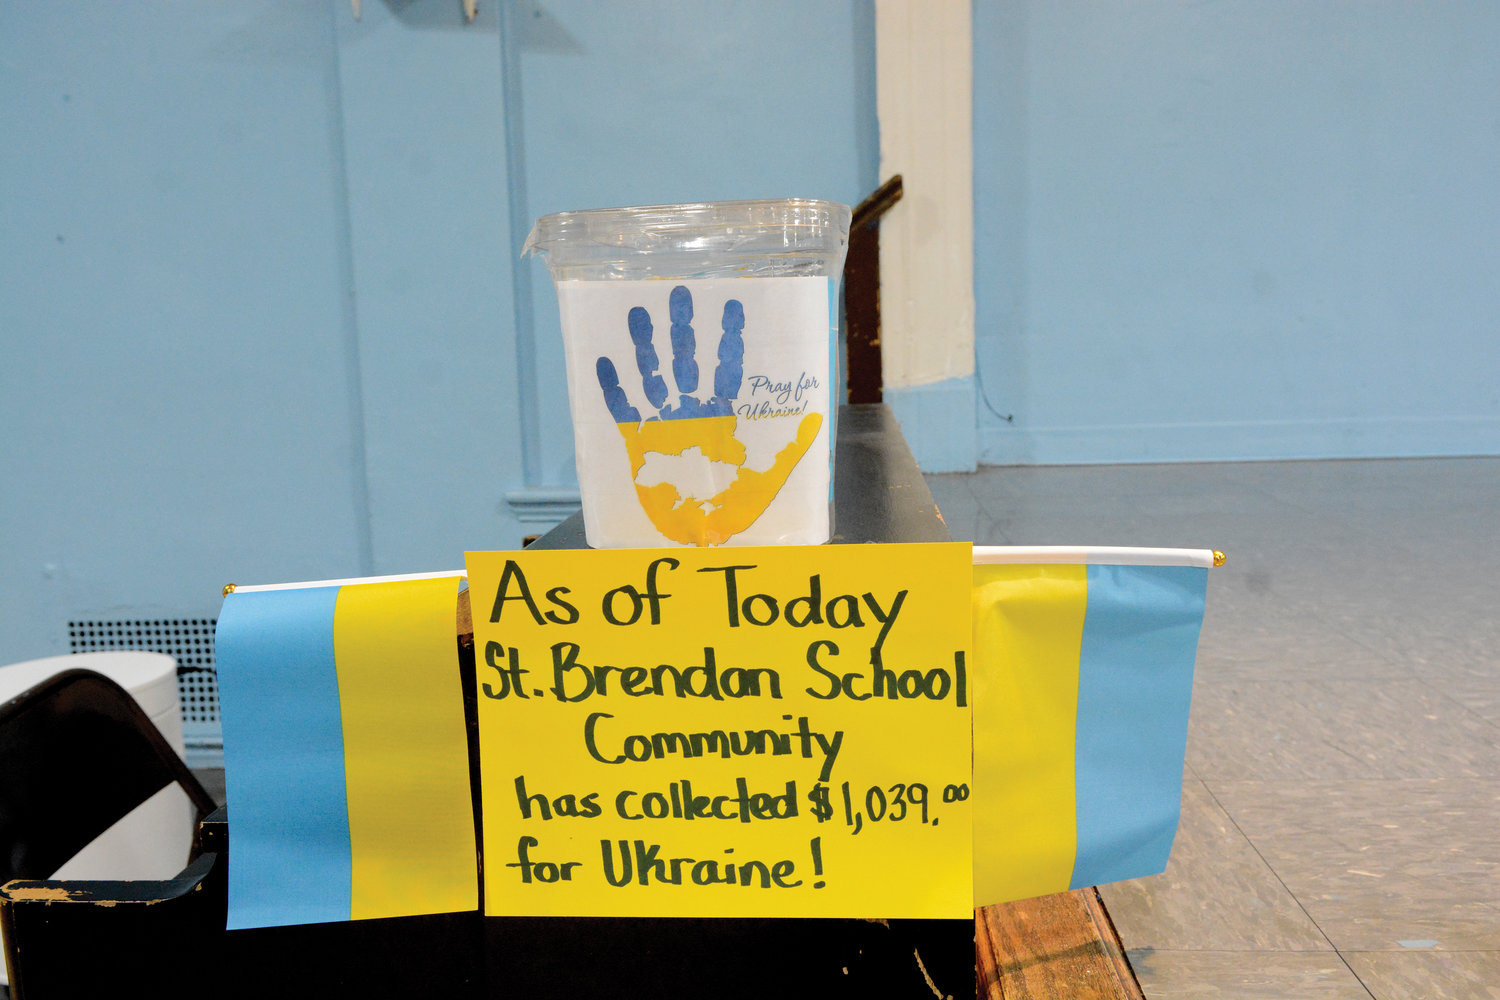 A poster below a collection container, flanked by Ukrainian flags, displays the total St. Brendan’s School has contributed to the cause so far.